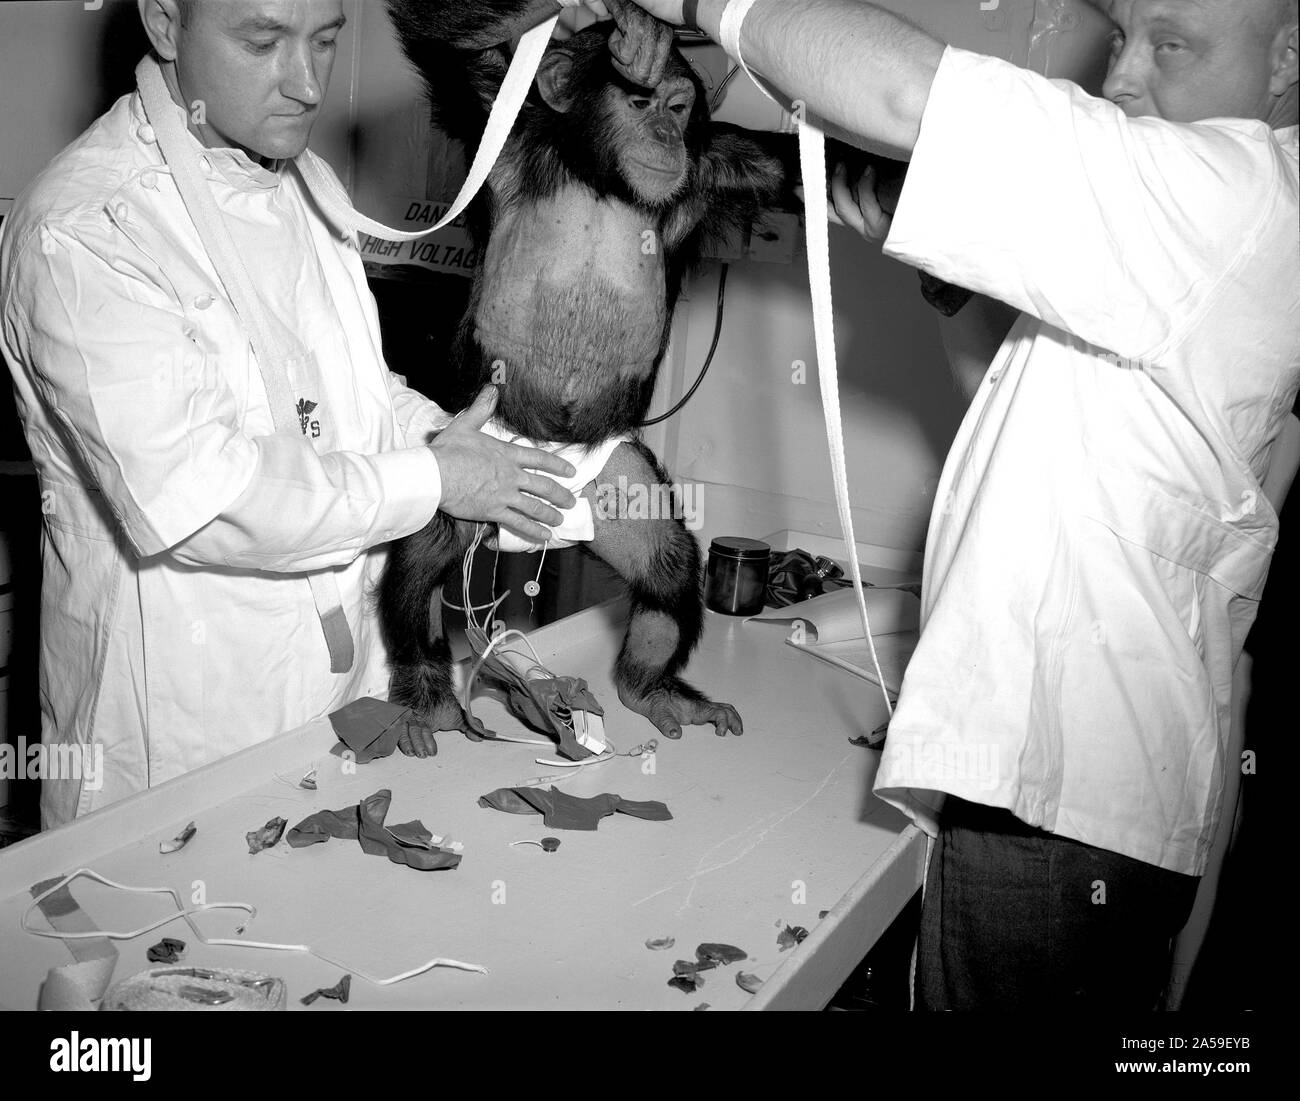 Chimpanzee 'Ham' being assisted into 'spacesuit' prior to the Mercury-Redstone 2 (MR-2) test flight which was conducted on Jan. 31, 1961. Stock Photo